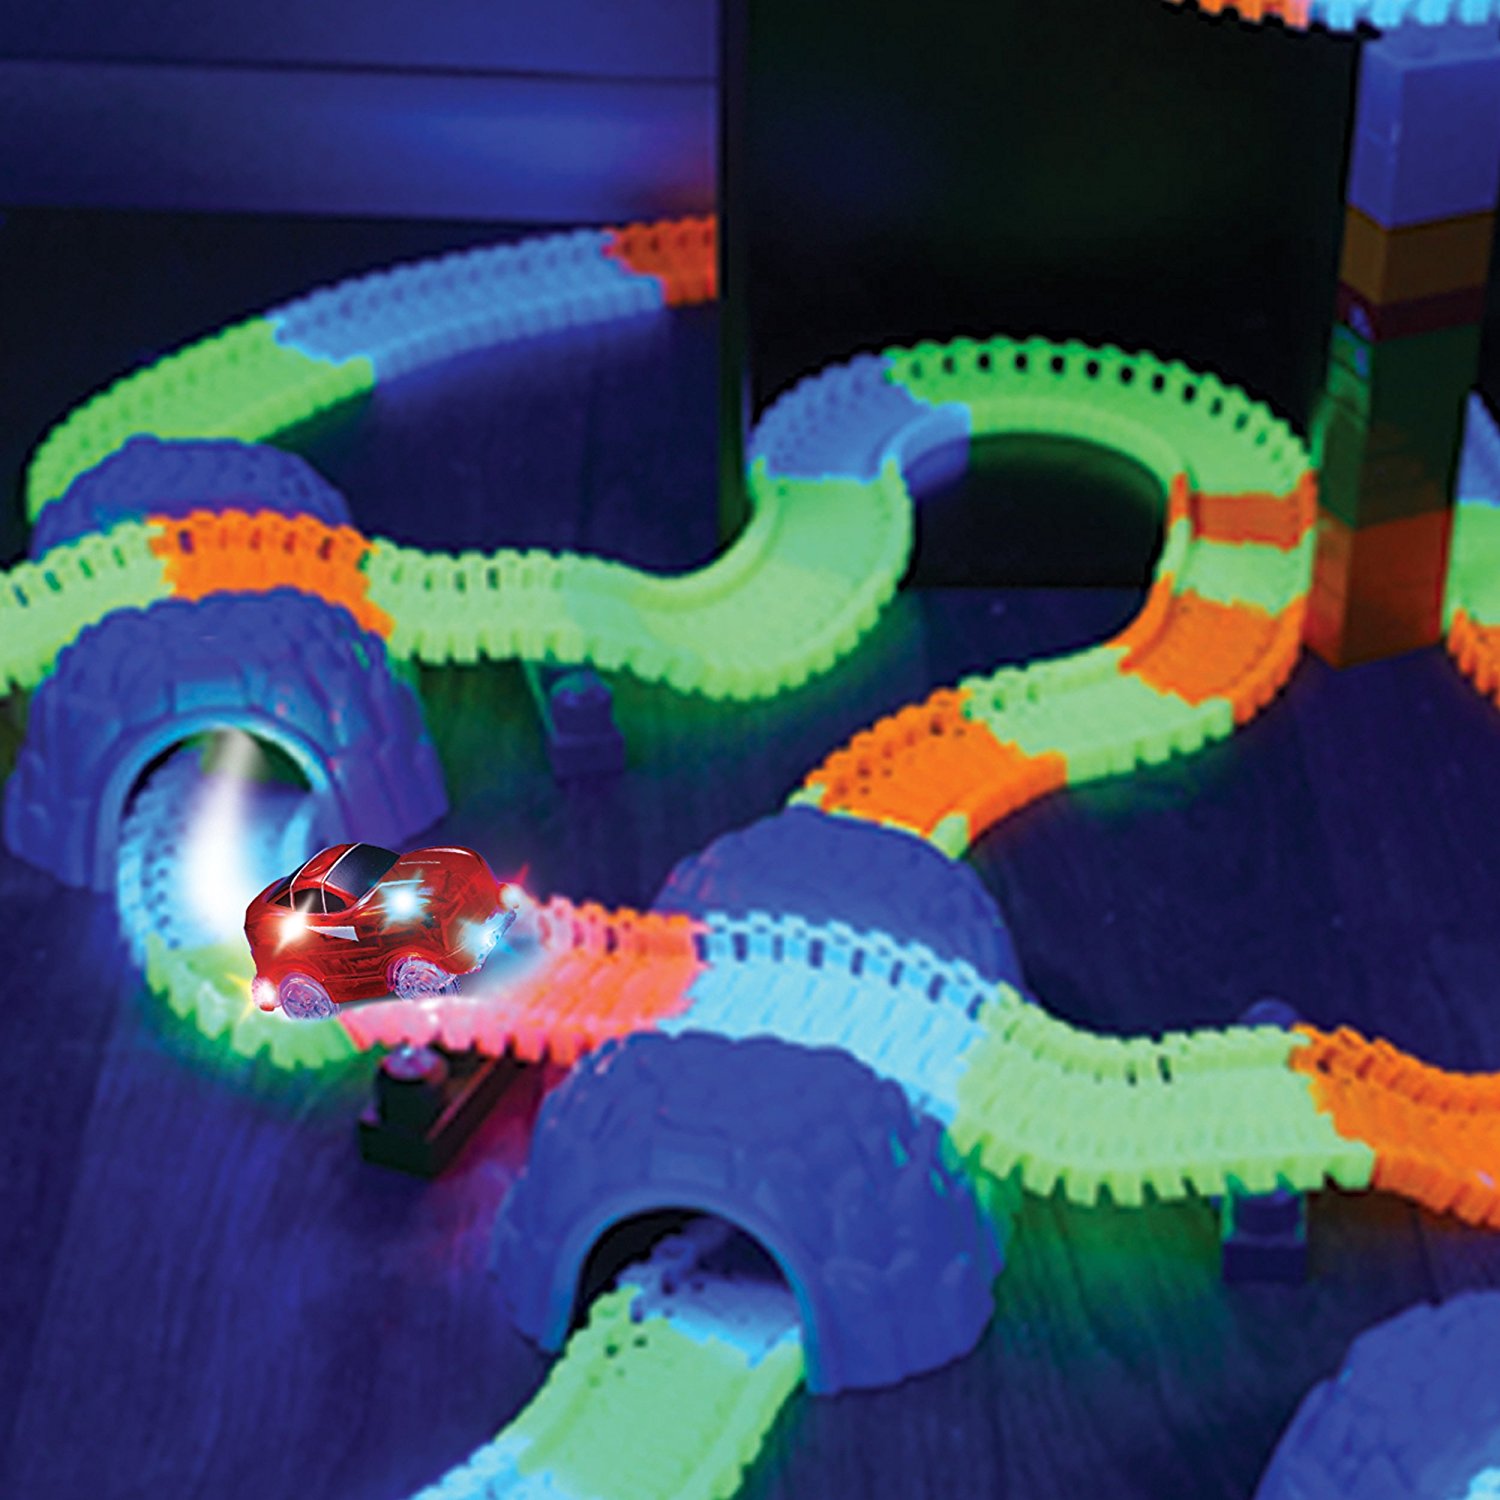 Ontel Magic Tracks The Amazon Racetrack That Bends Only $12.99! (Reg $19.97)